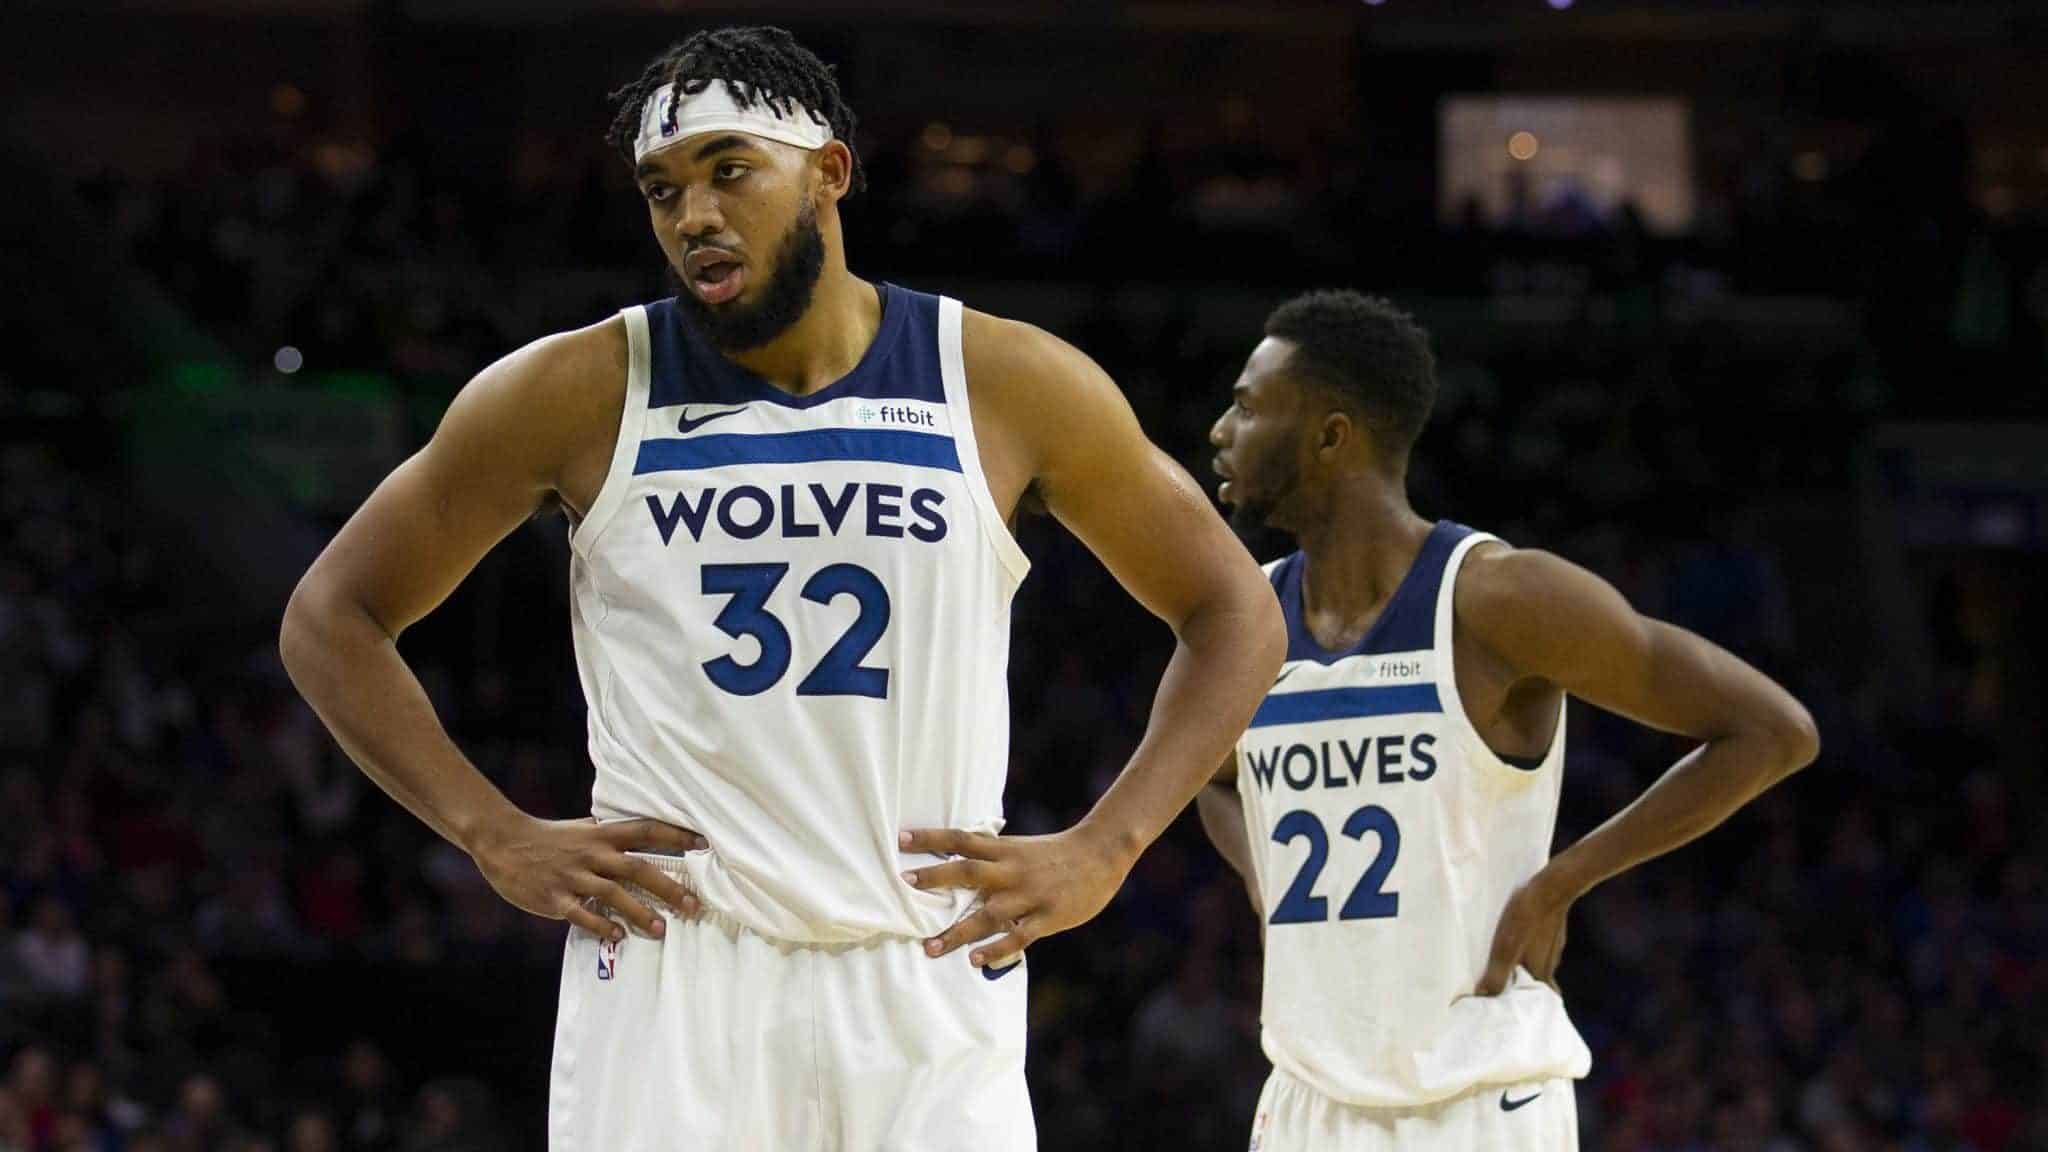 PHILADELPHIA, PA - OCTOBER 30: Karl-Anthony Towns #32 and Andrew Wiggins #22 of the Minnesota Timberwolves look on against the Philadelphia 76ers at the Wells Fargo Center on October 30, 2019 in Philadelphia, Pennsylvania. NOTE TO USER: User expressly acknowledges and agrees that, by downloading and or using this photograph, User is consenting to the terms and conditions of the Getty Images License Agreement.